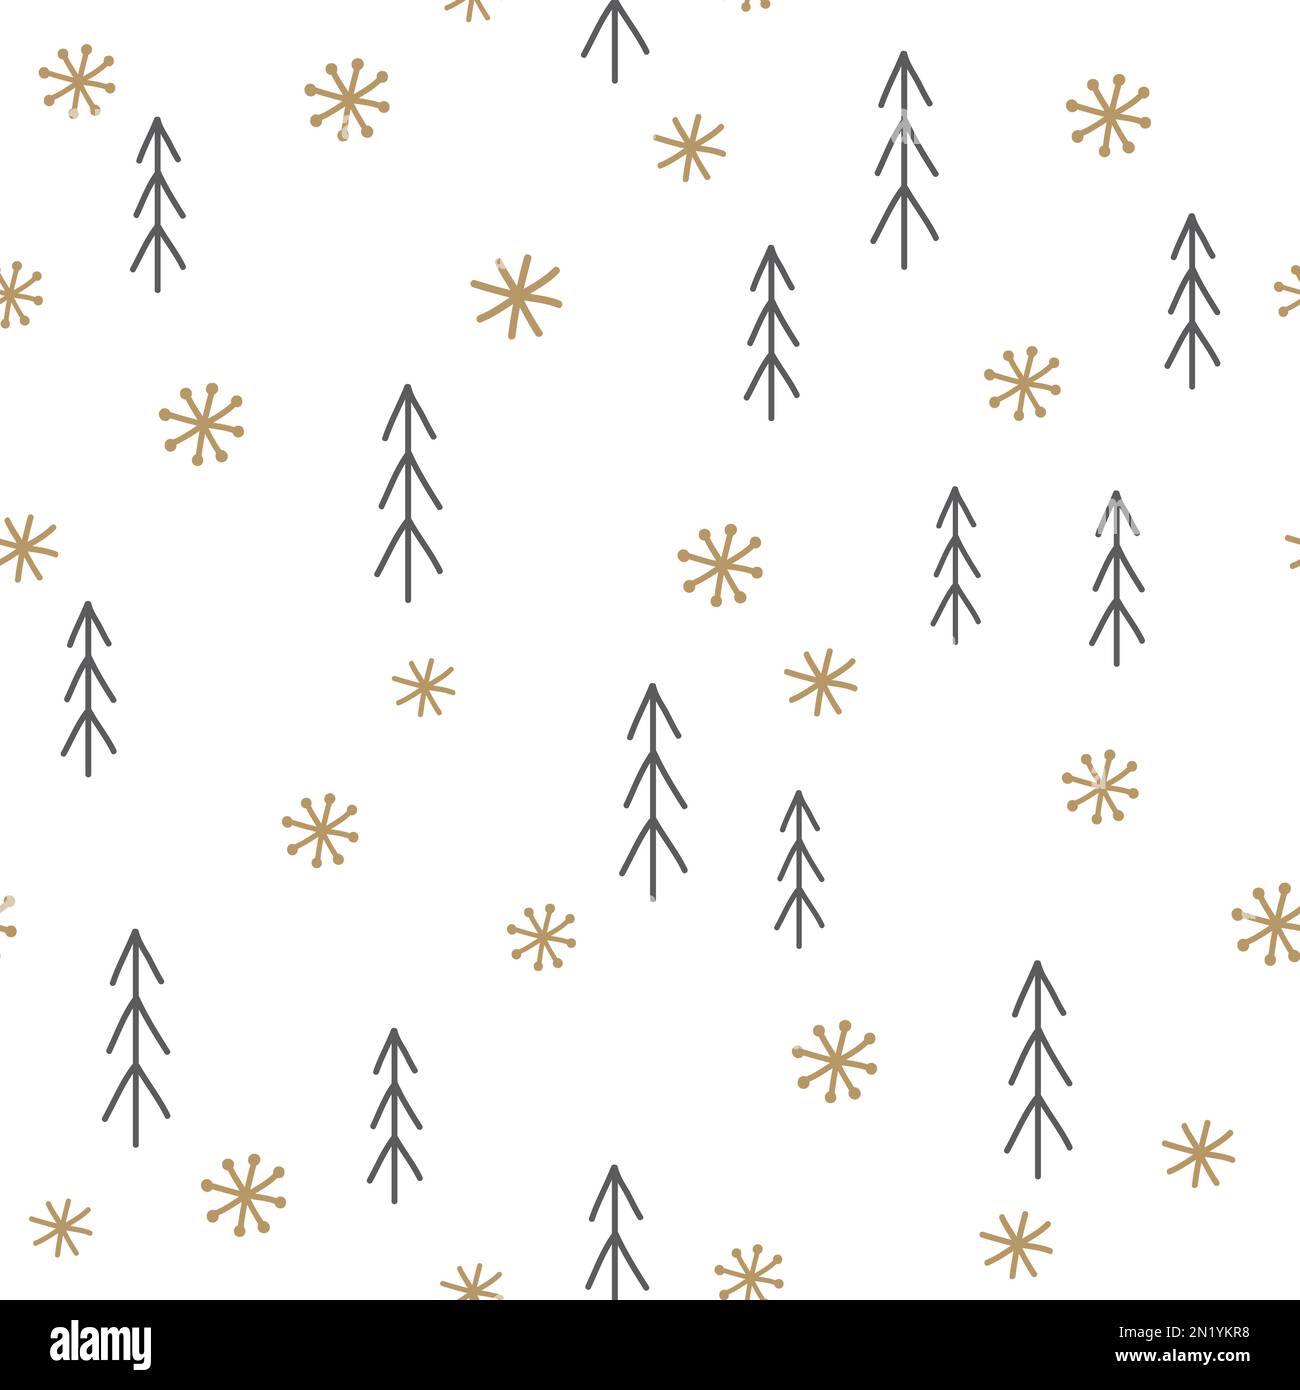 Winter seamless pattern with trees and snowflakes. Stock Photo